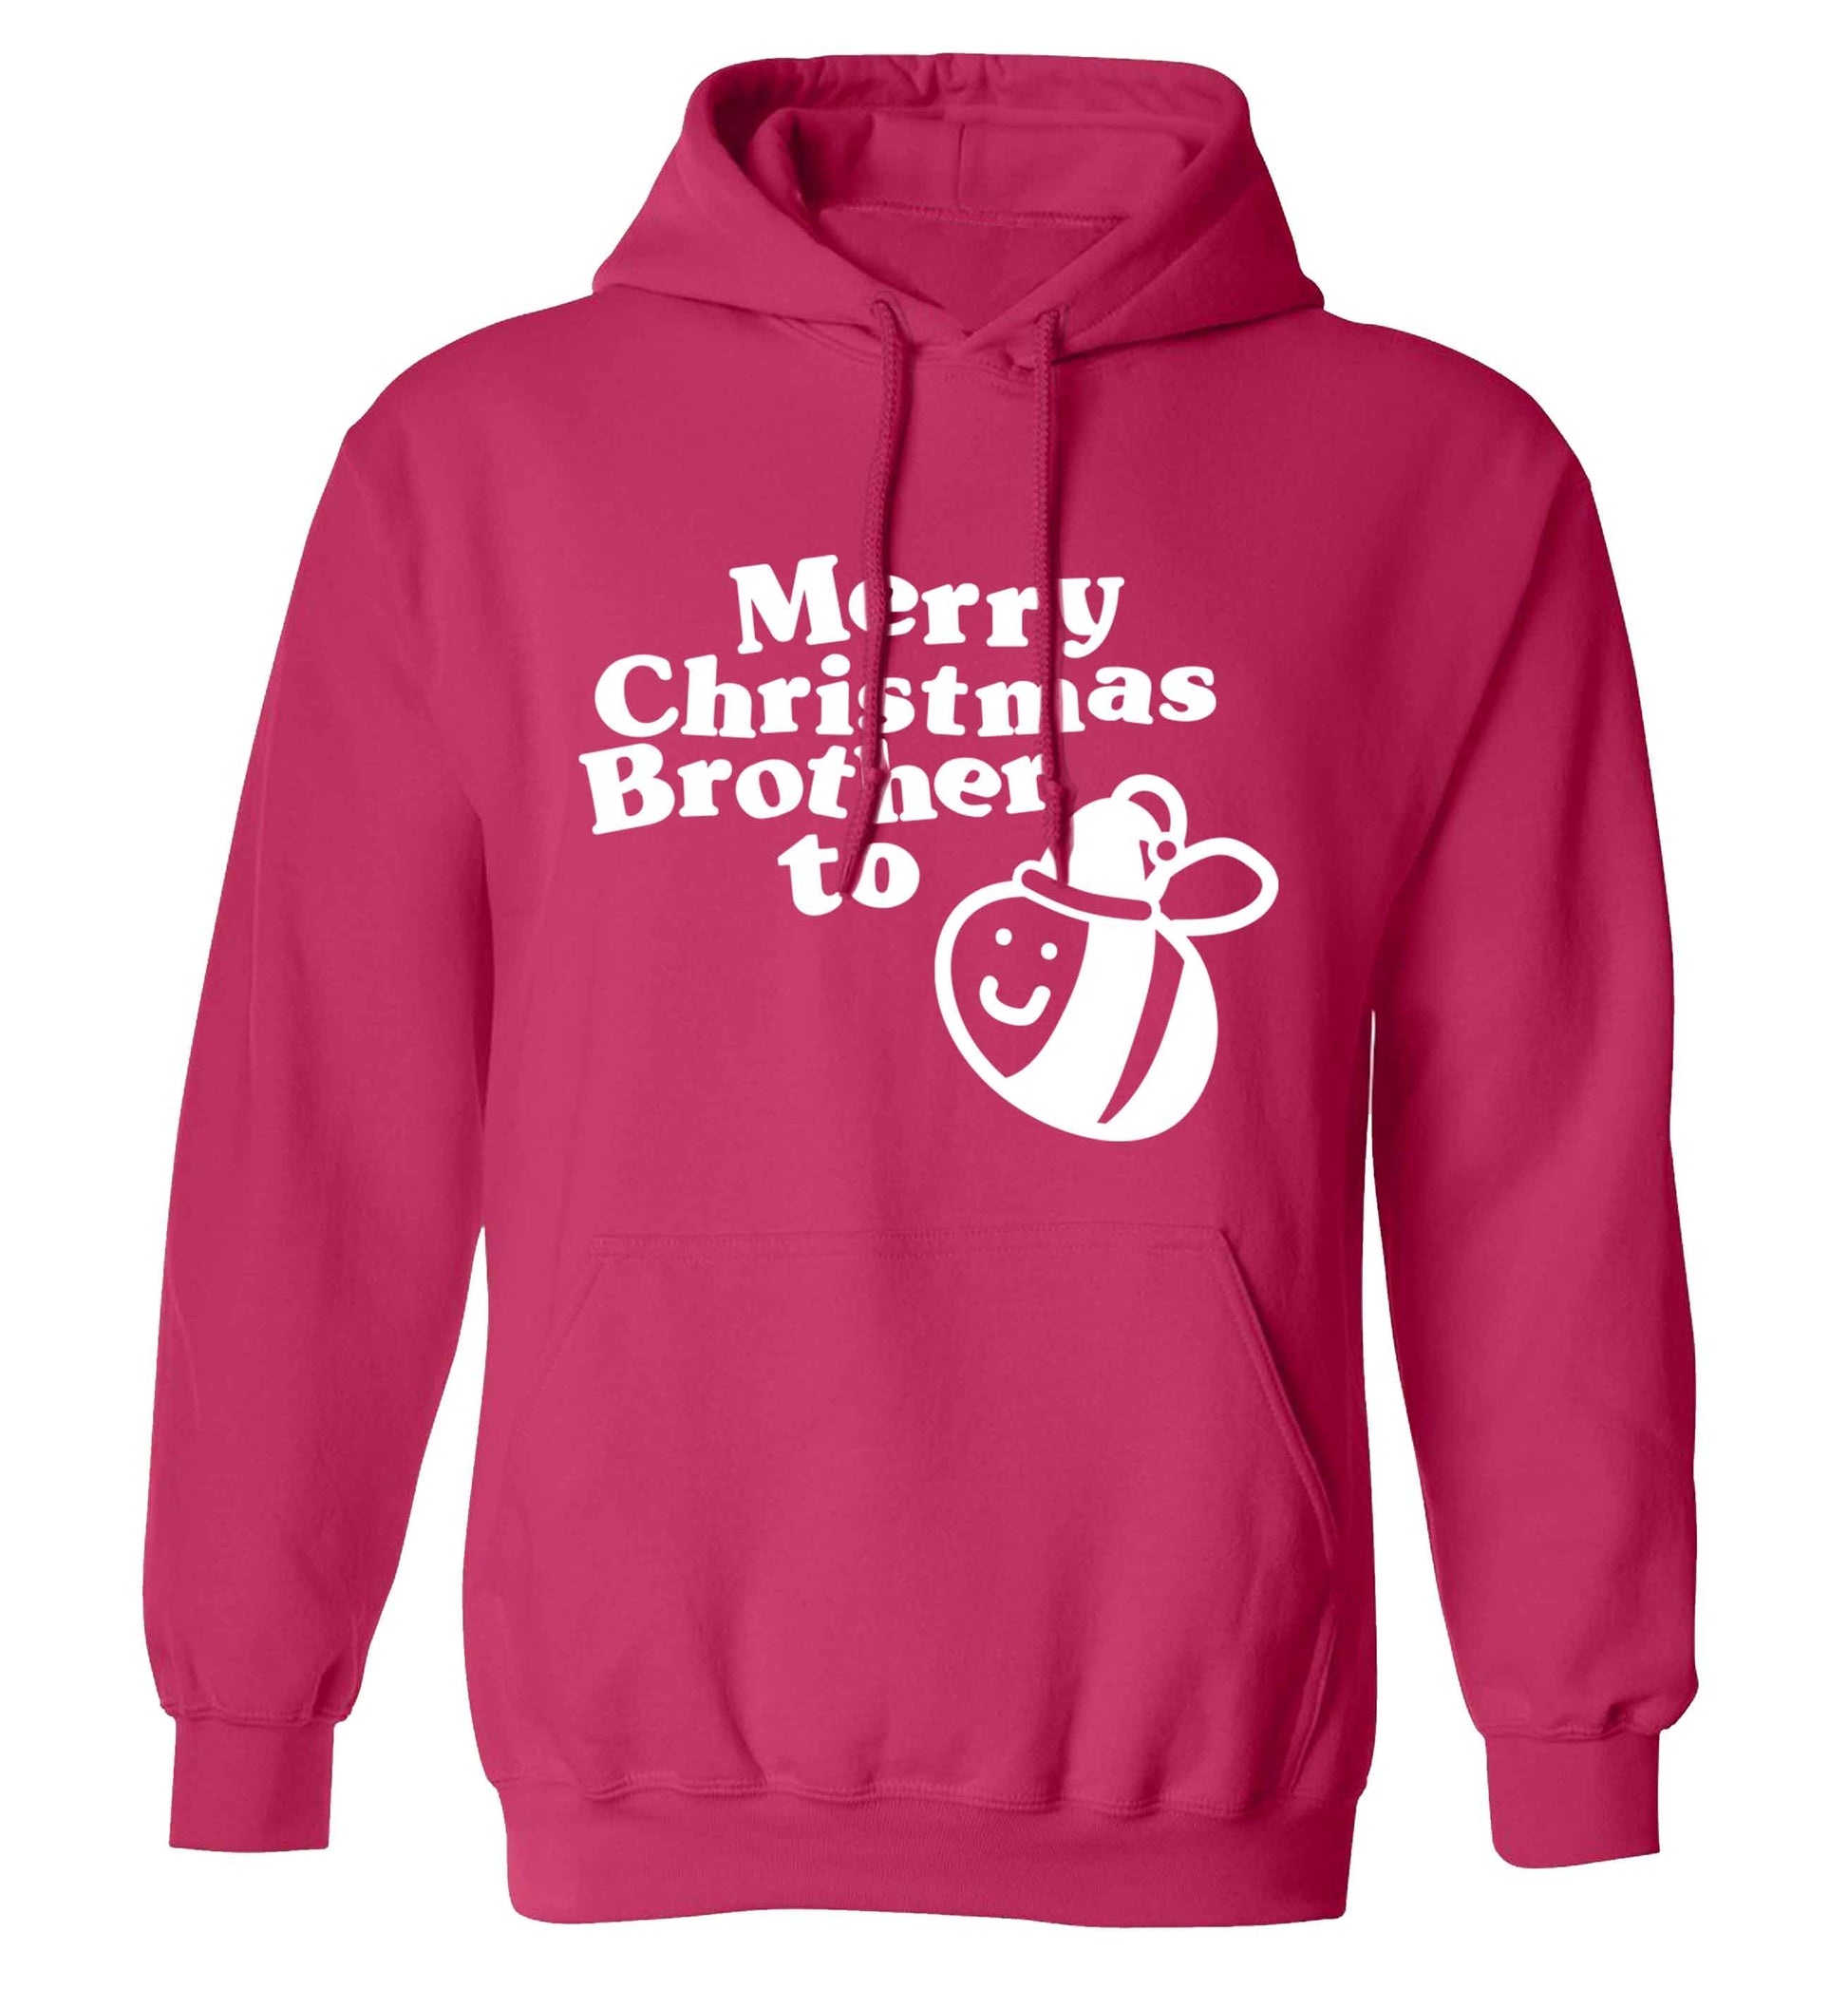 Merry Christmas brother to be adults unisex pink hoodie 2XL